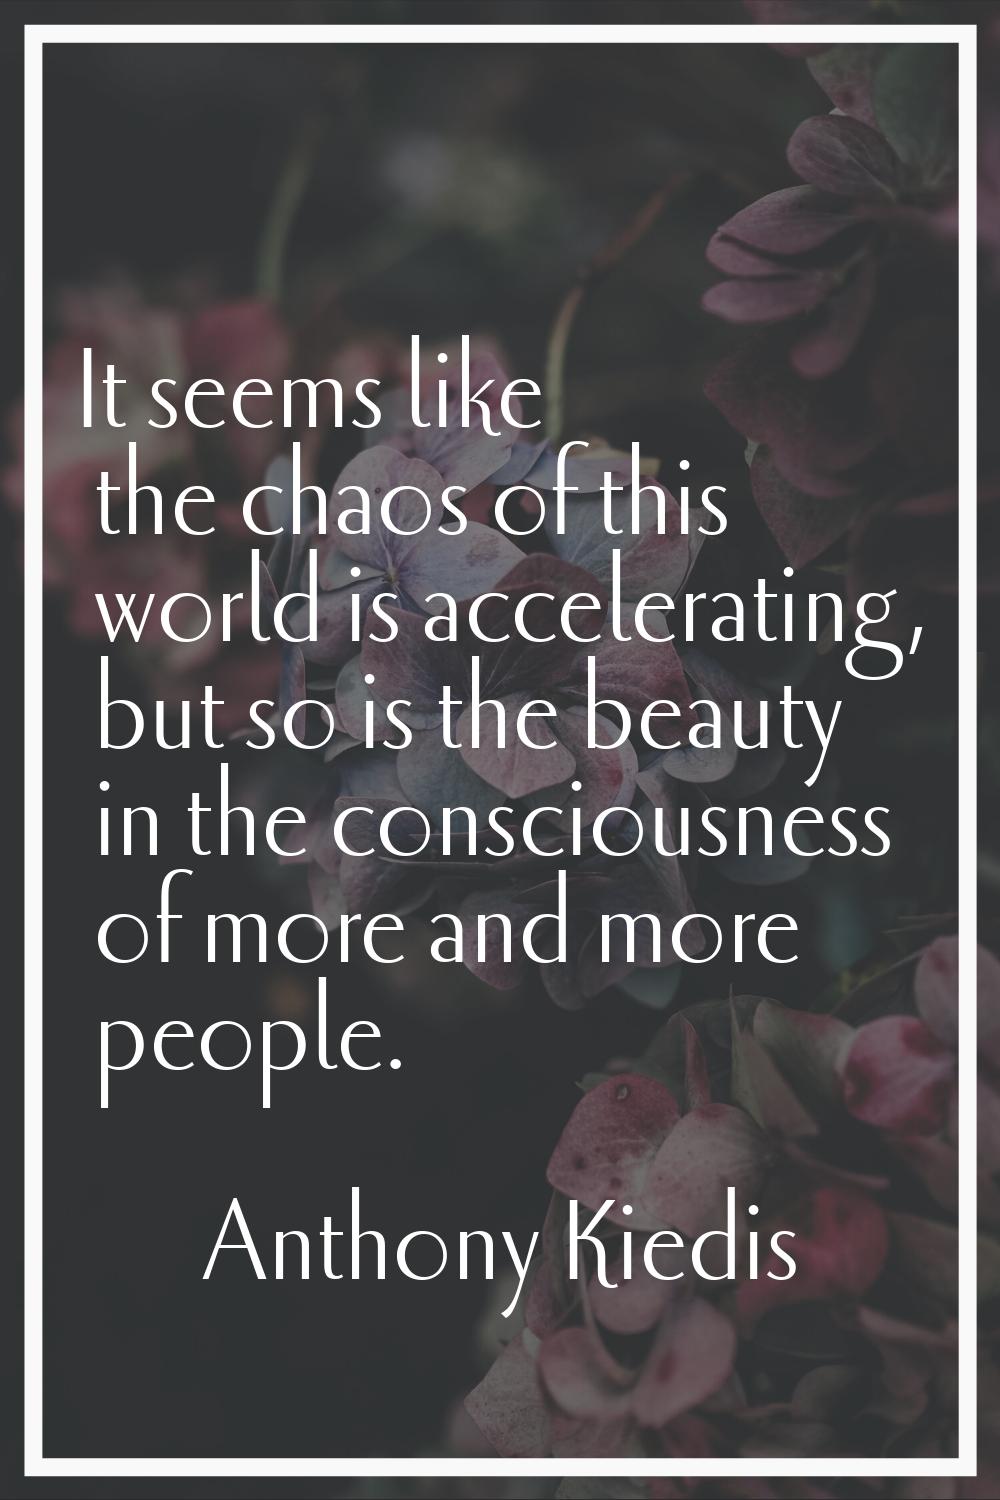 It seems like the chaos of this world is accelerating, but so is the beauty in the consciousness of